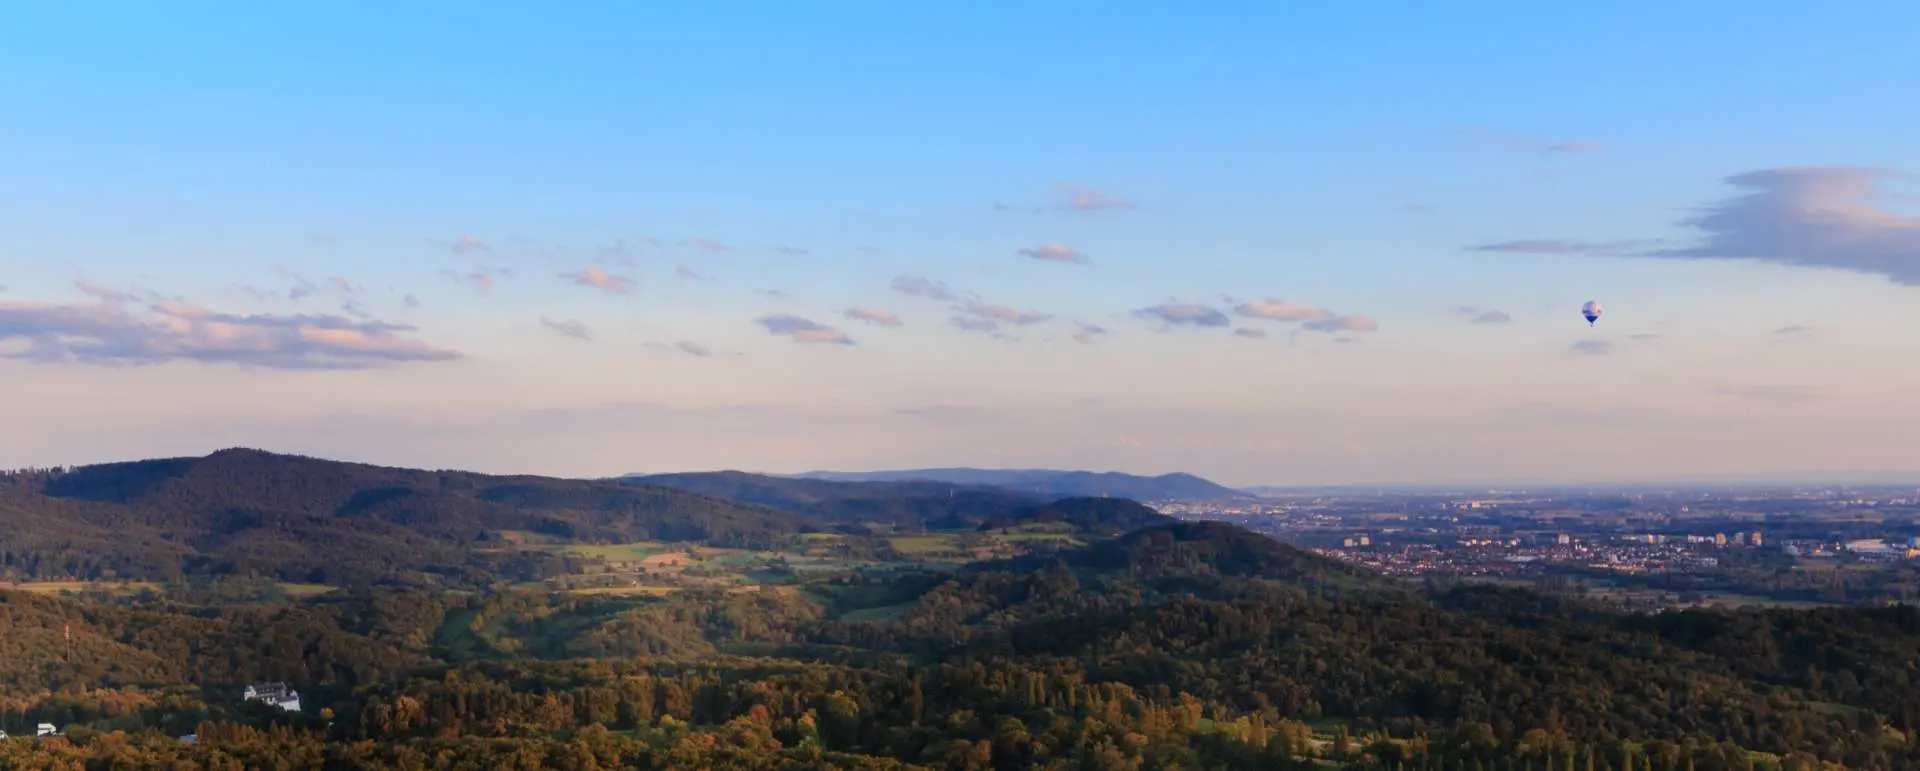 Constituency of Odenwald - the destination for families